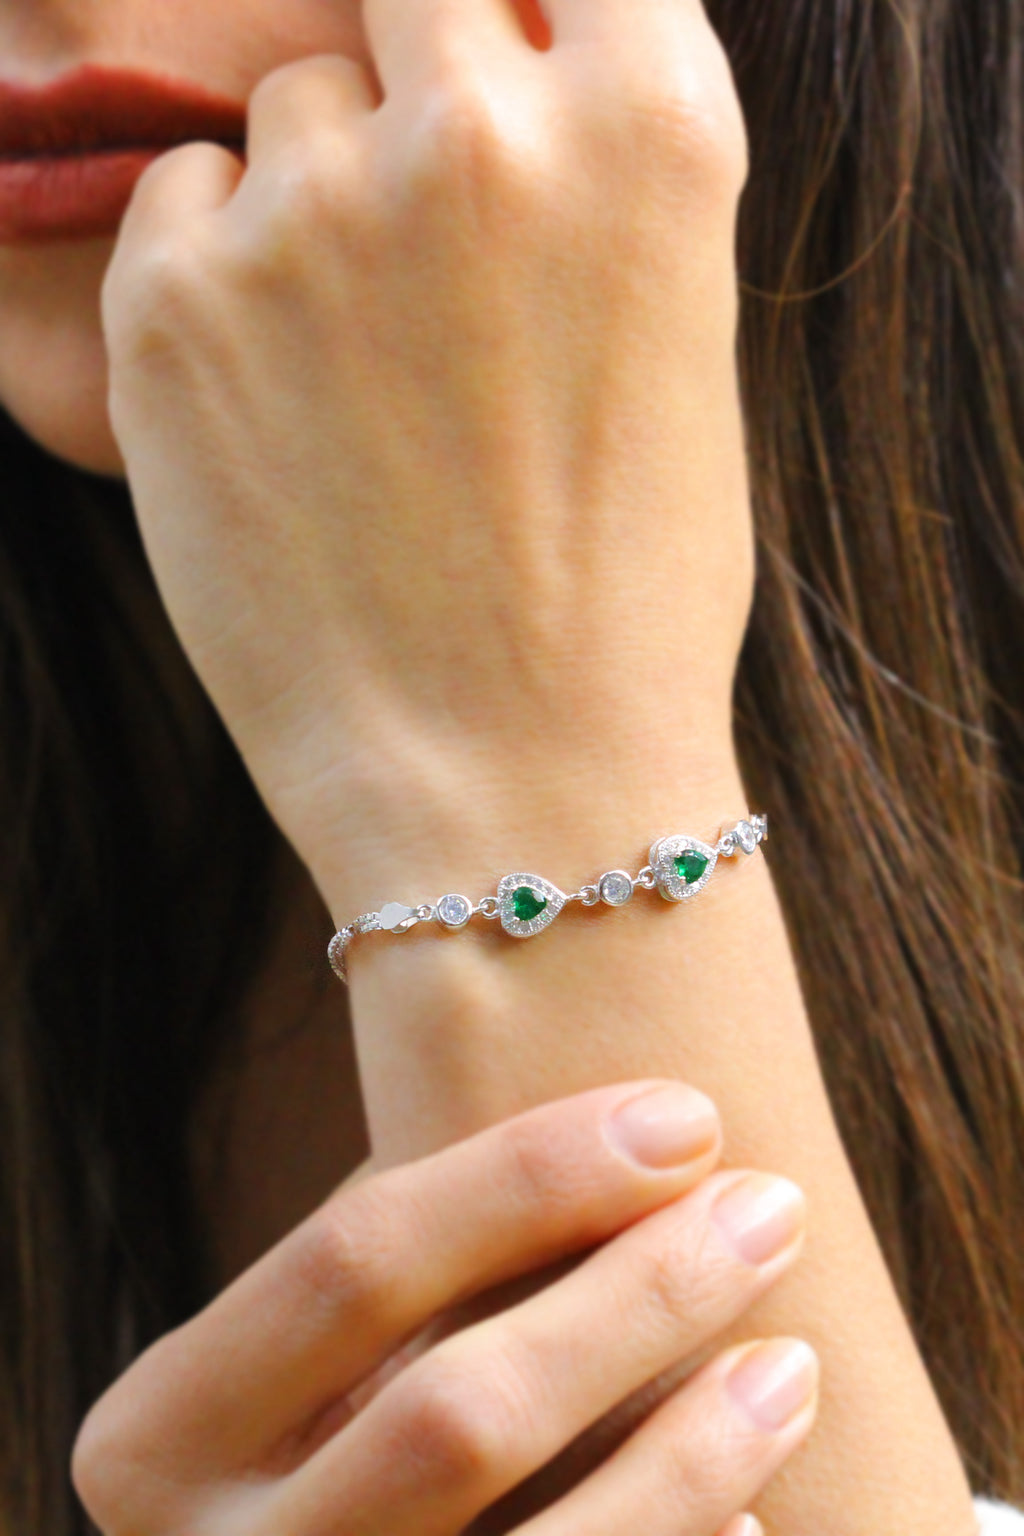 Authentic Handmade Silver Bracelet With Emerald and Zircon (NG201015239)